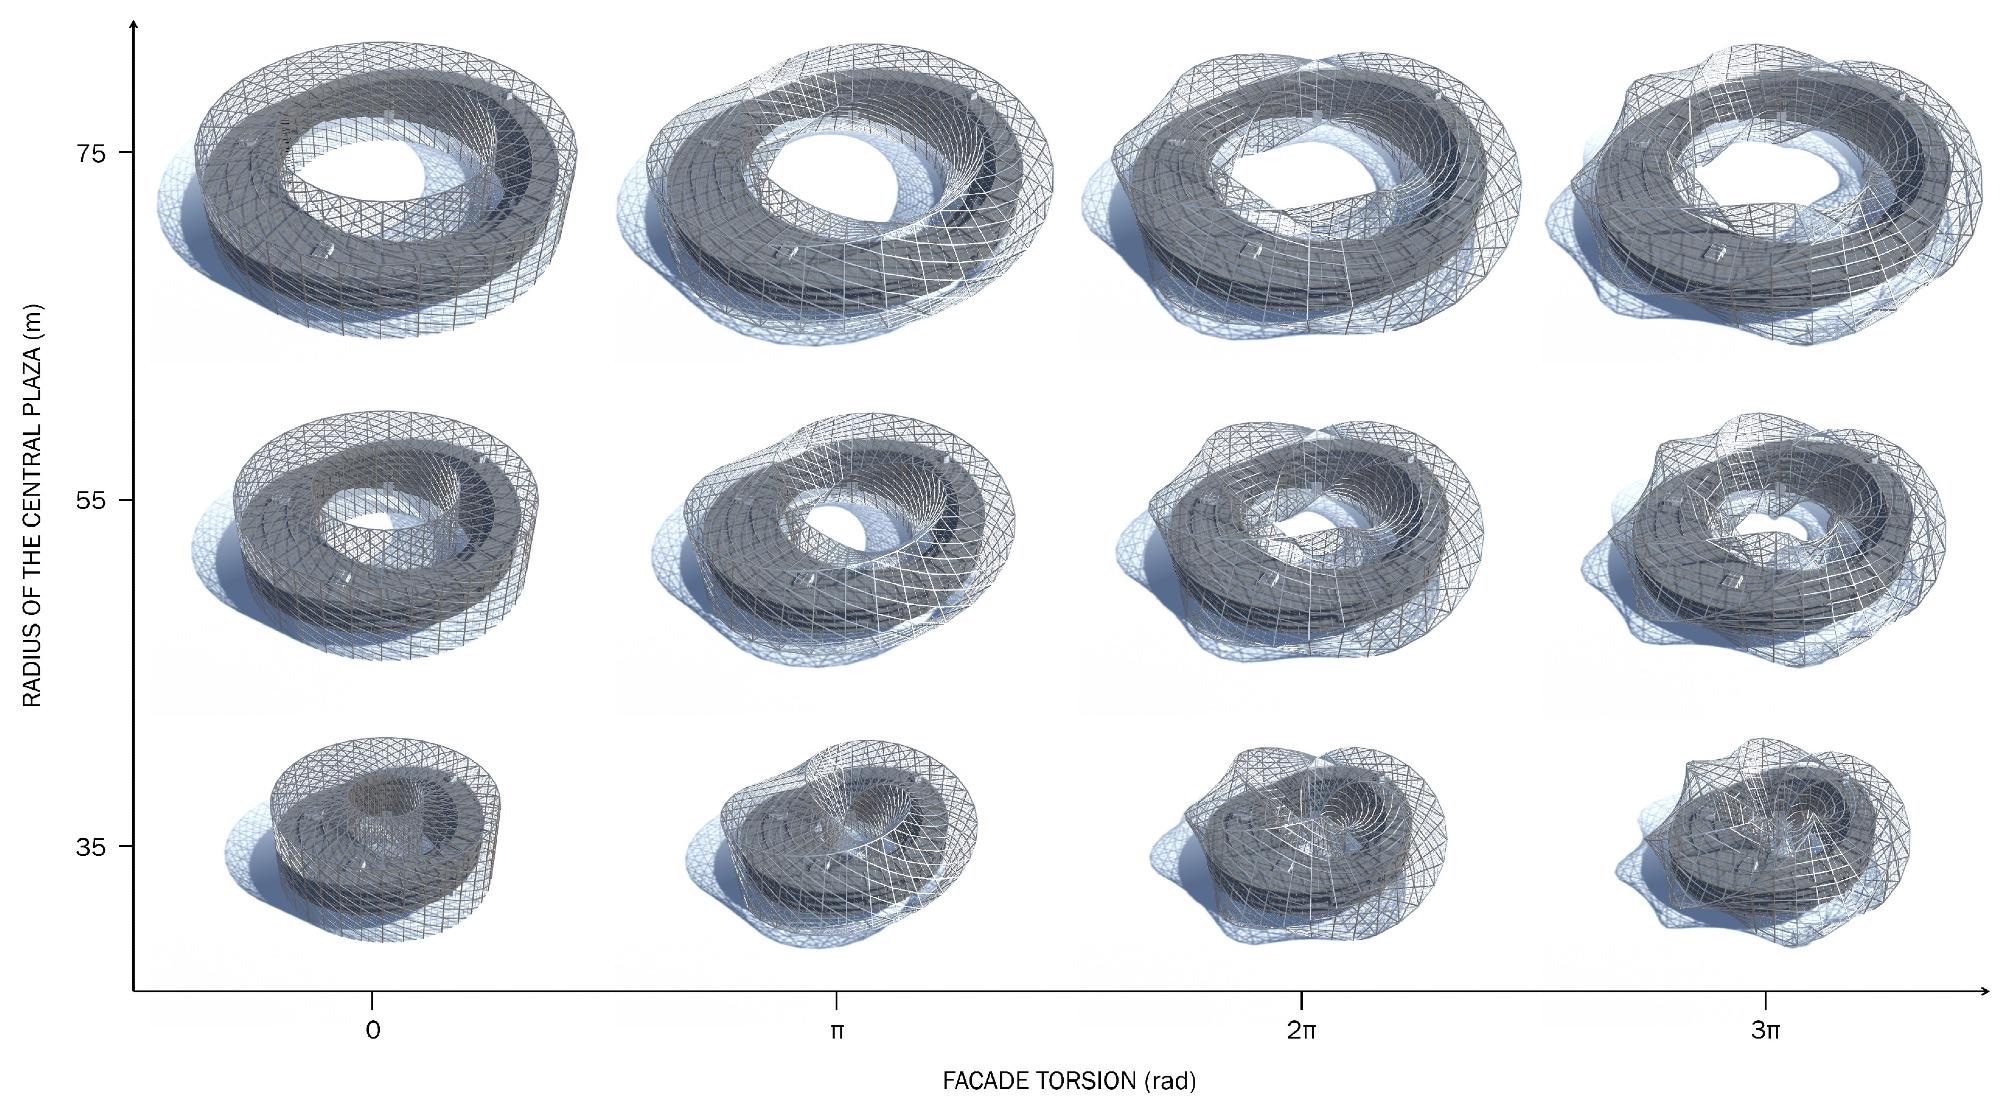 Variations of the ANL model produced by changing selected parameters in the program: radius of the central plaza and the building’s facade torsion.